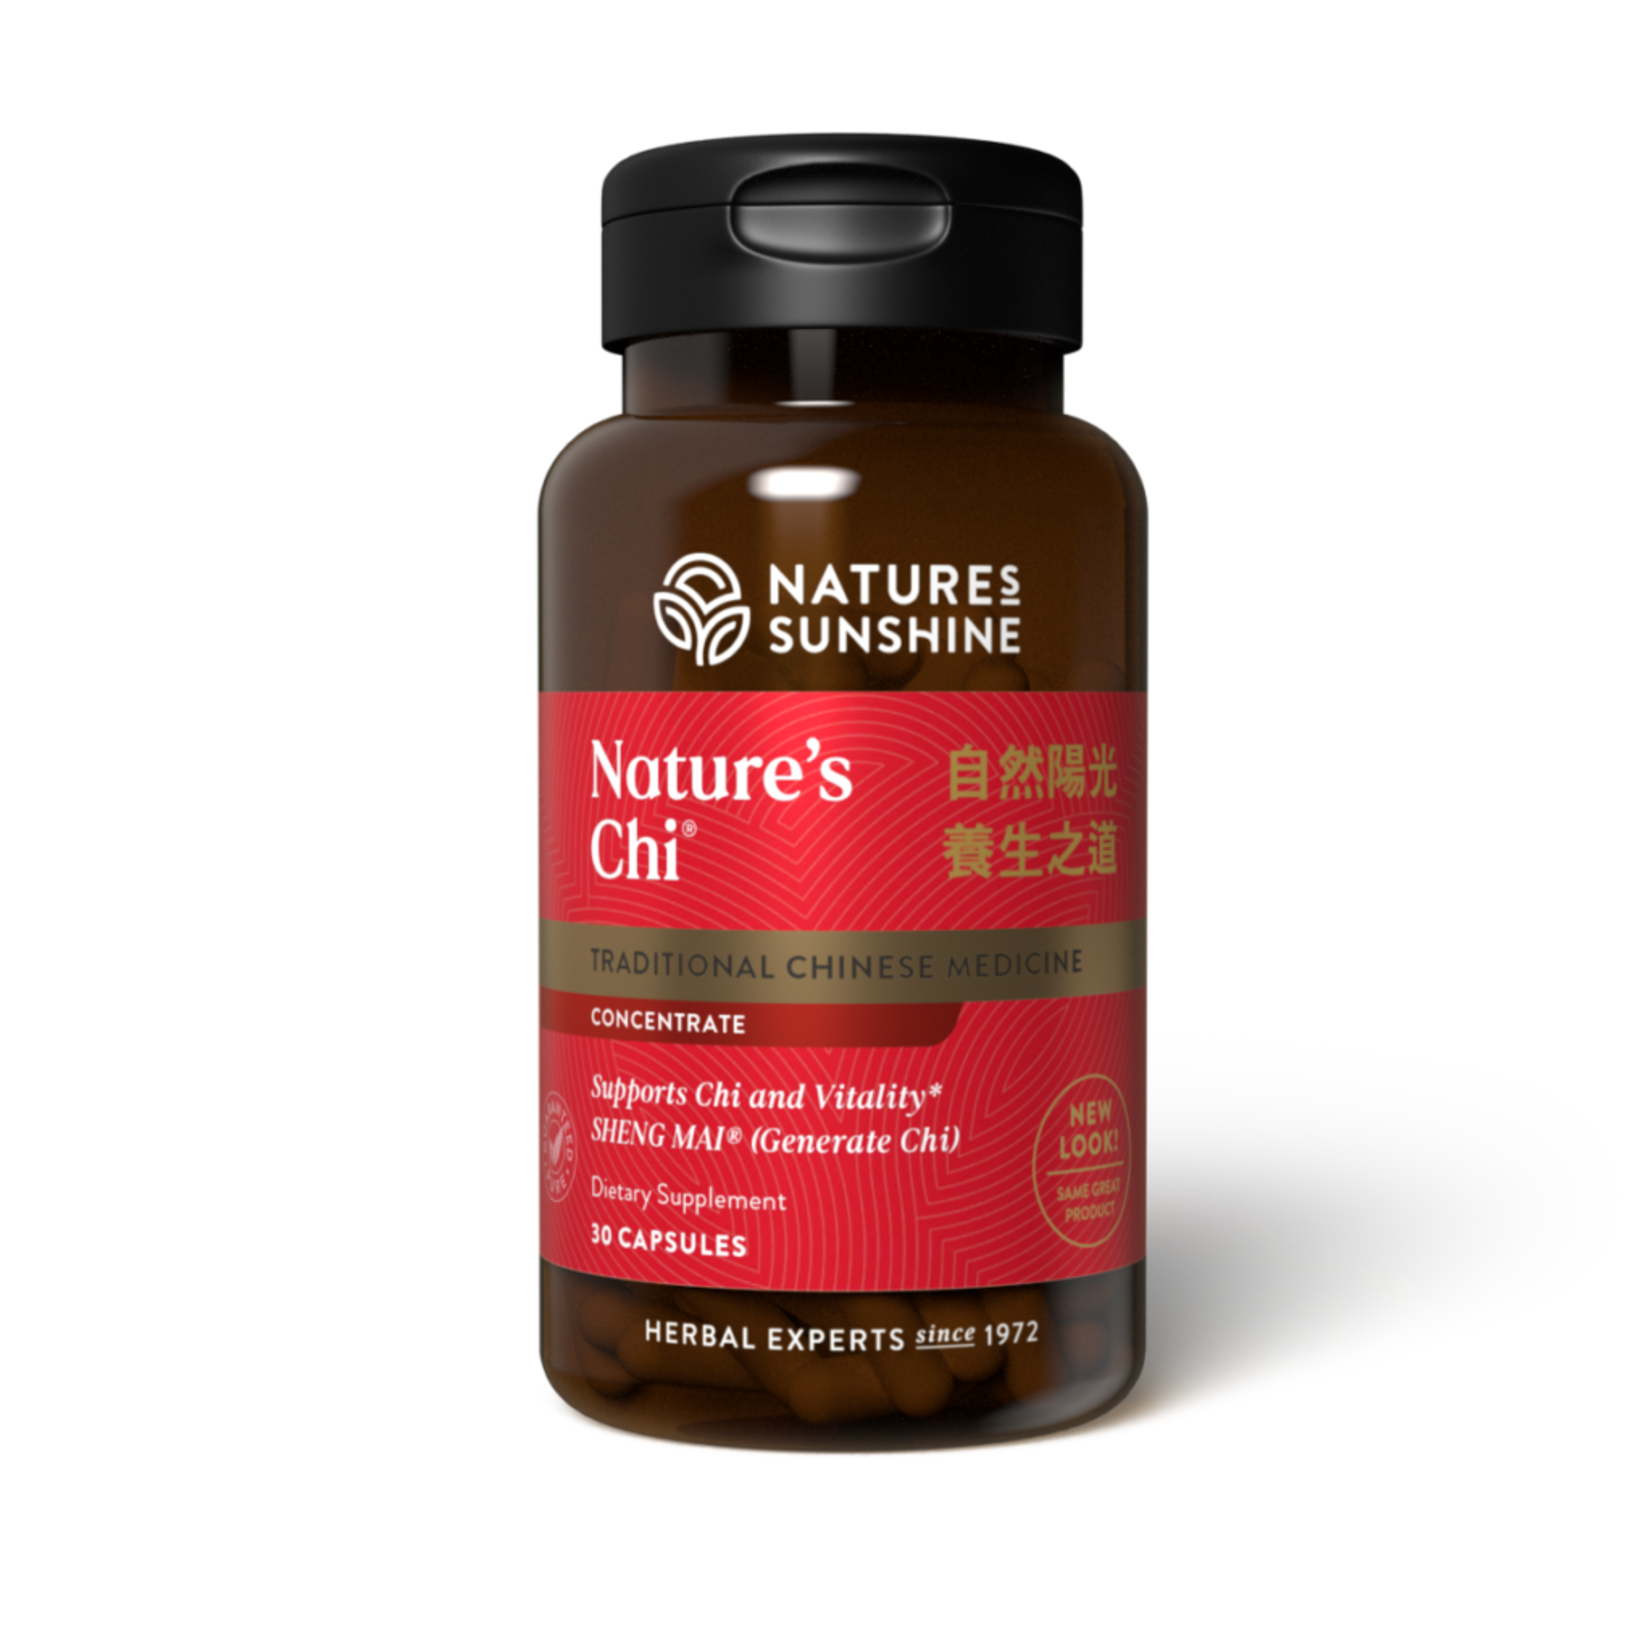 Nature's Sunshine Nature's Chi TCM Concentrate 30ct.